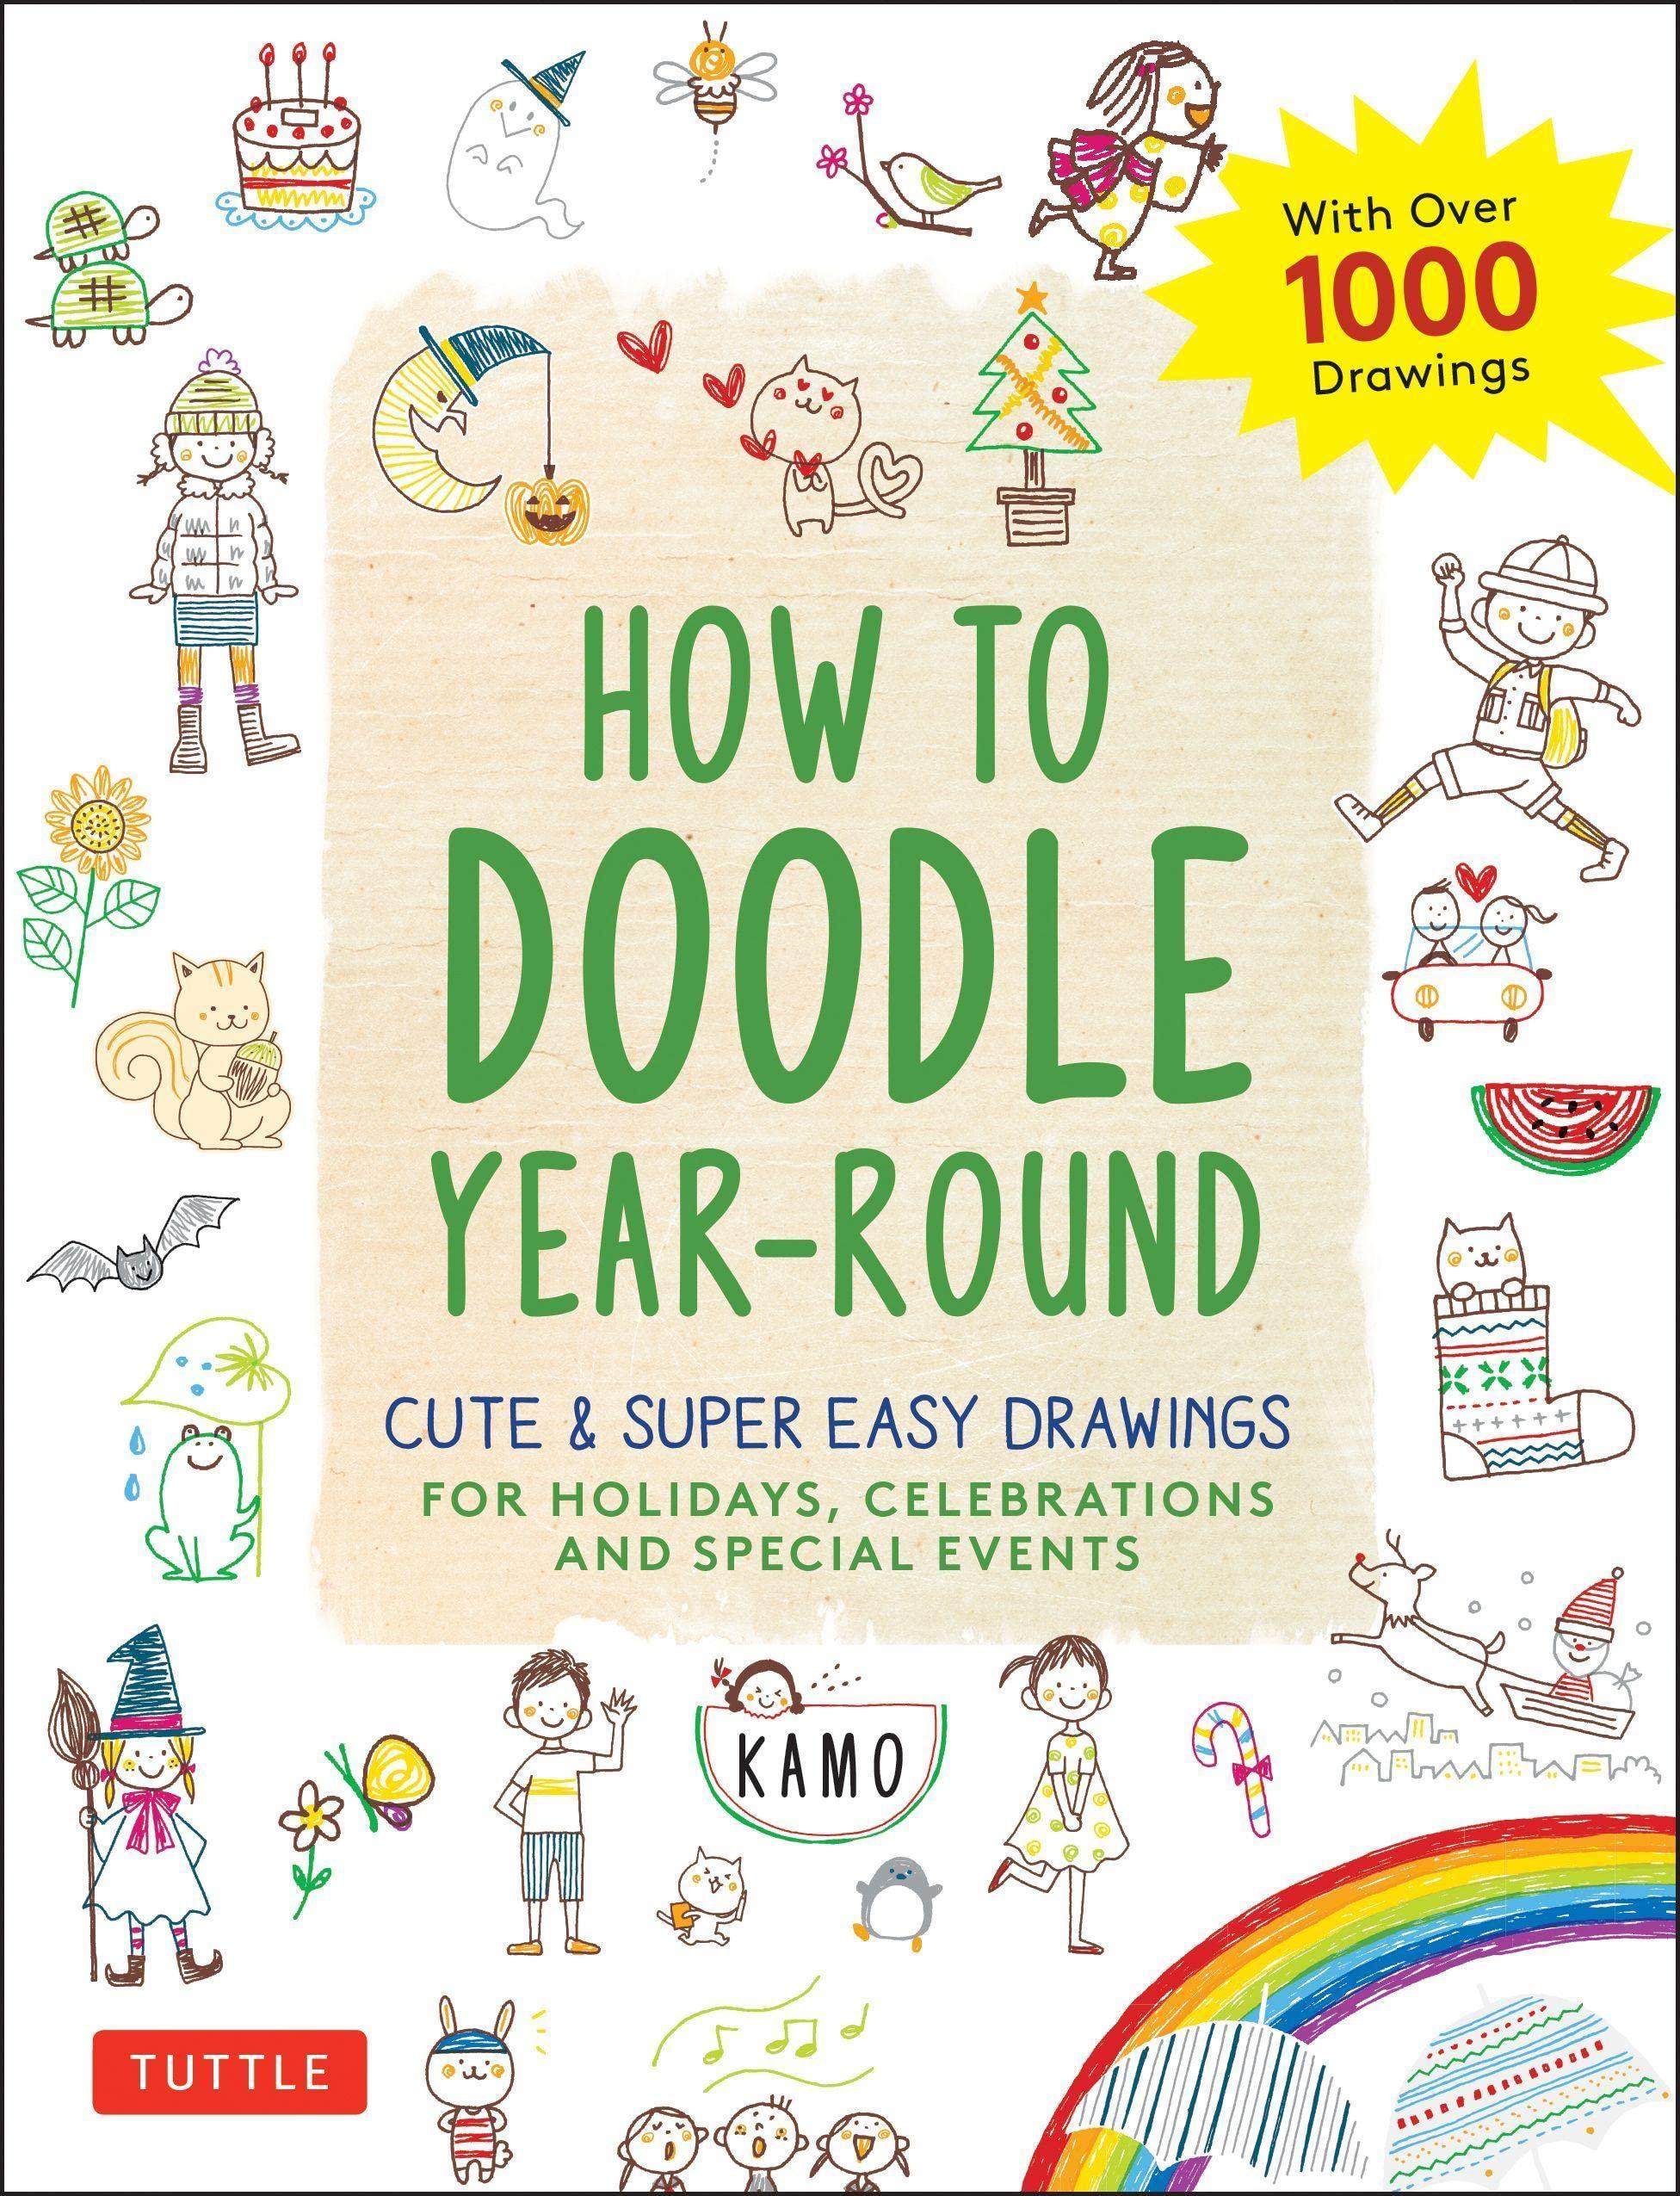 How To Doodle Year-round : Cute &amp; Super Easy Drawings For Holidays, Celebrations And Special Events - With Over 1000 Drawings